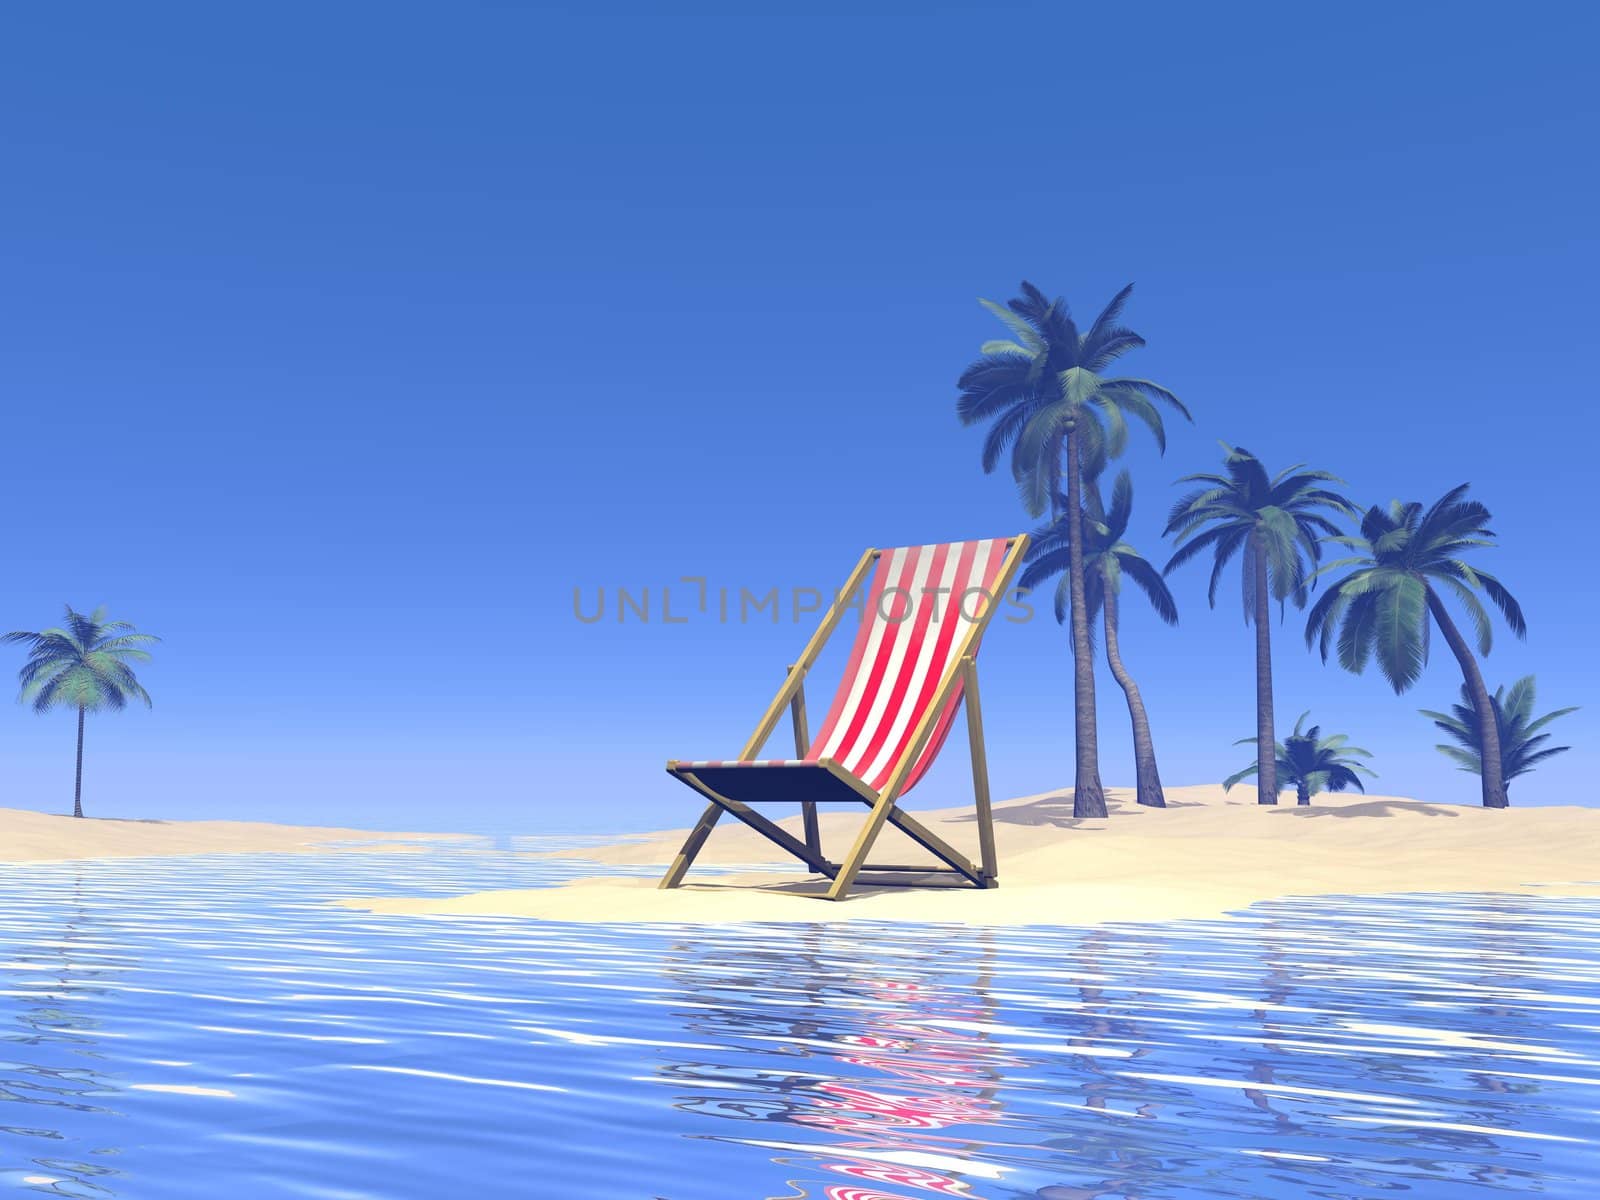 Chair on the sand next to the ocean and palm trees in the back on a paradise siland of sand